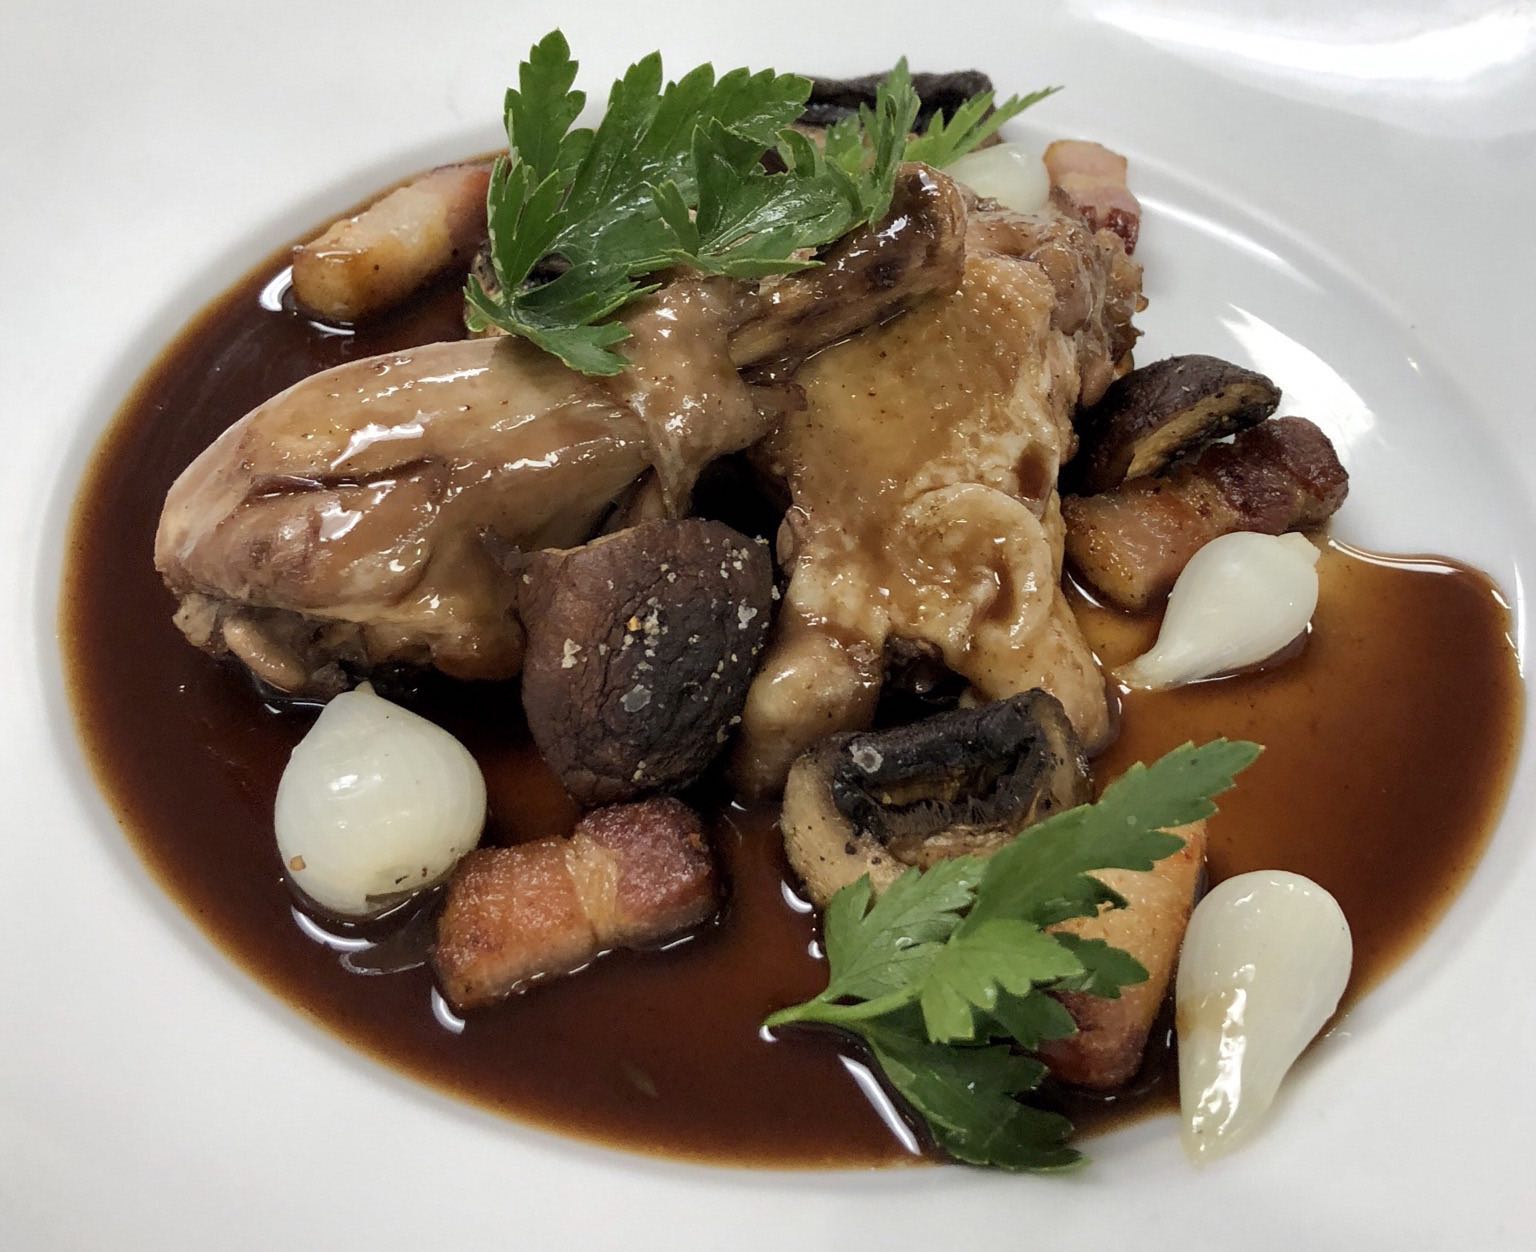 Coq au vin is plated in an ICE Culinary Arts class.